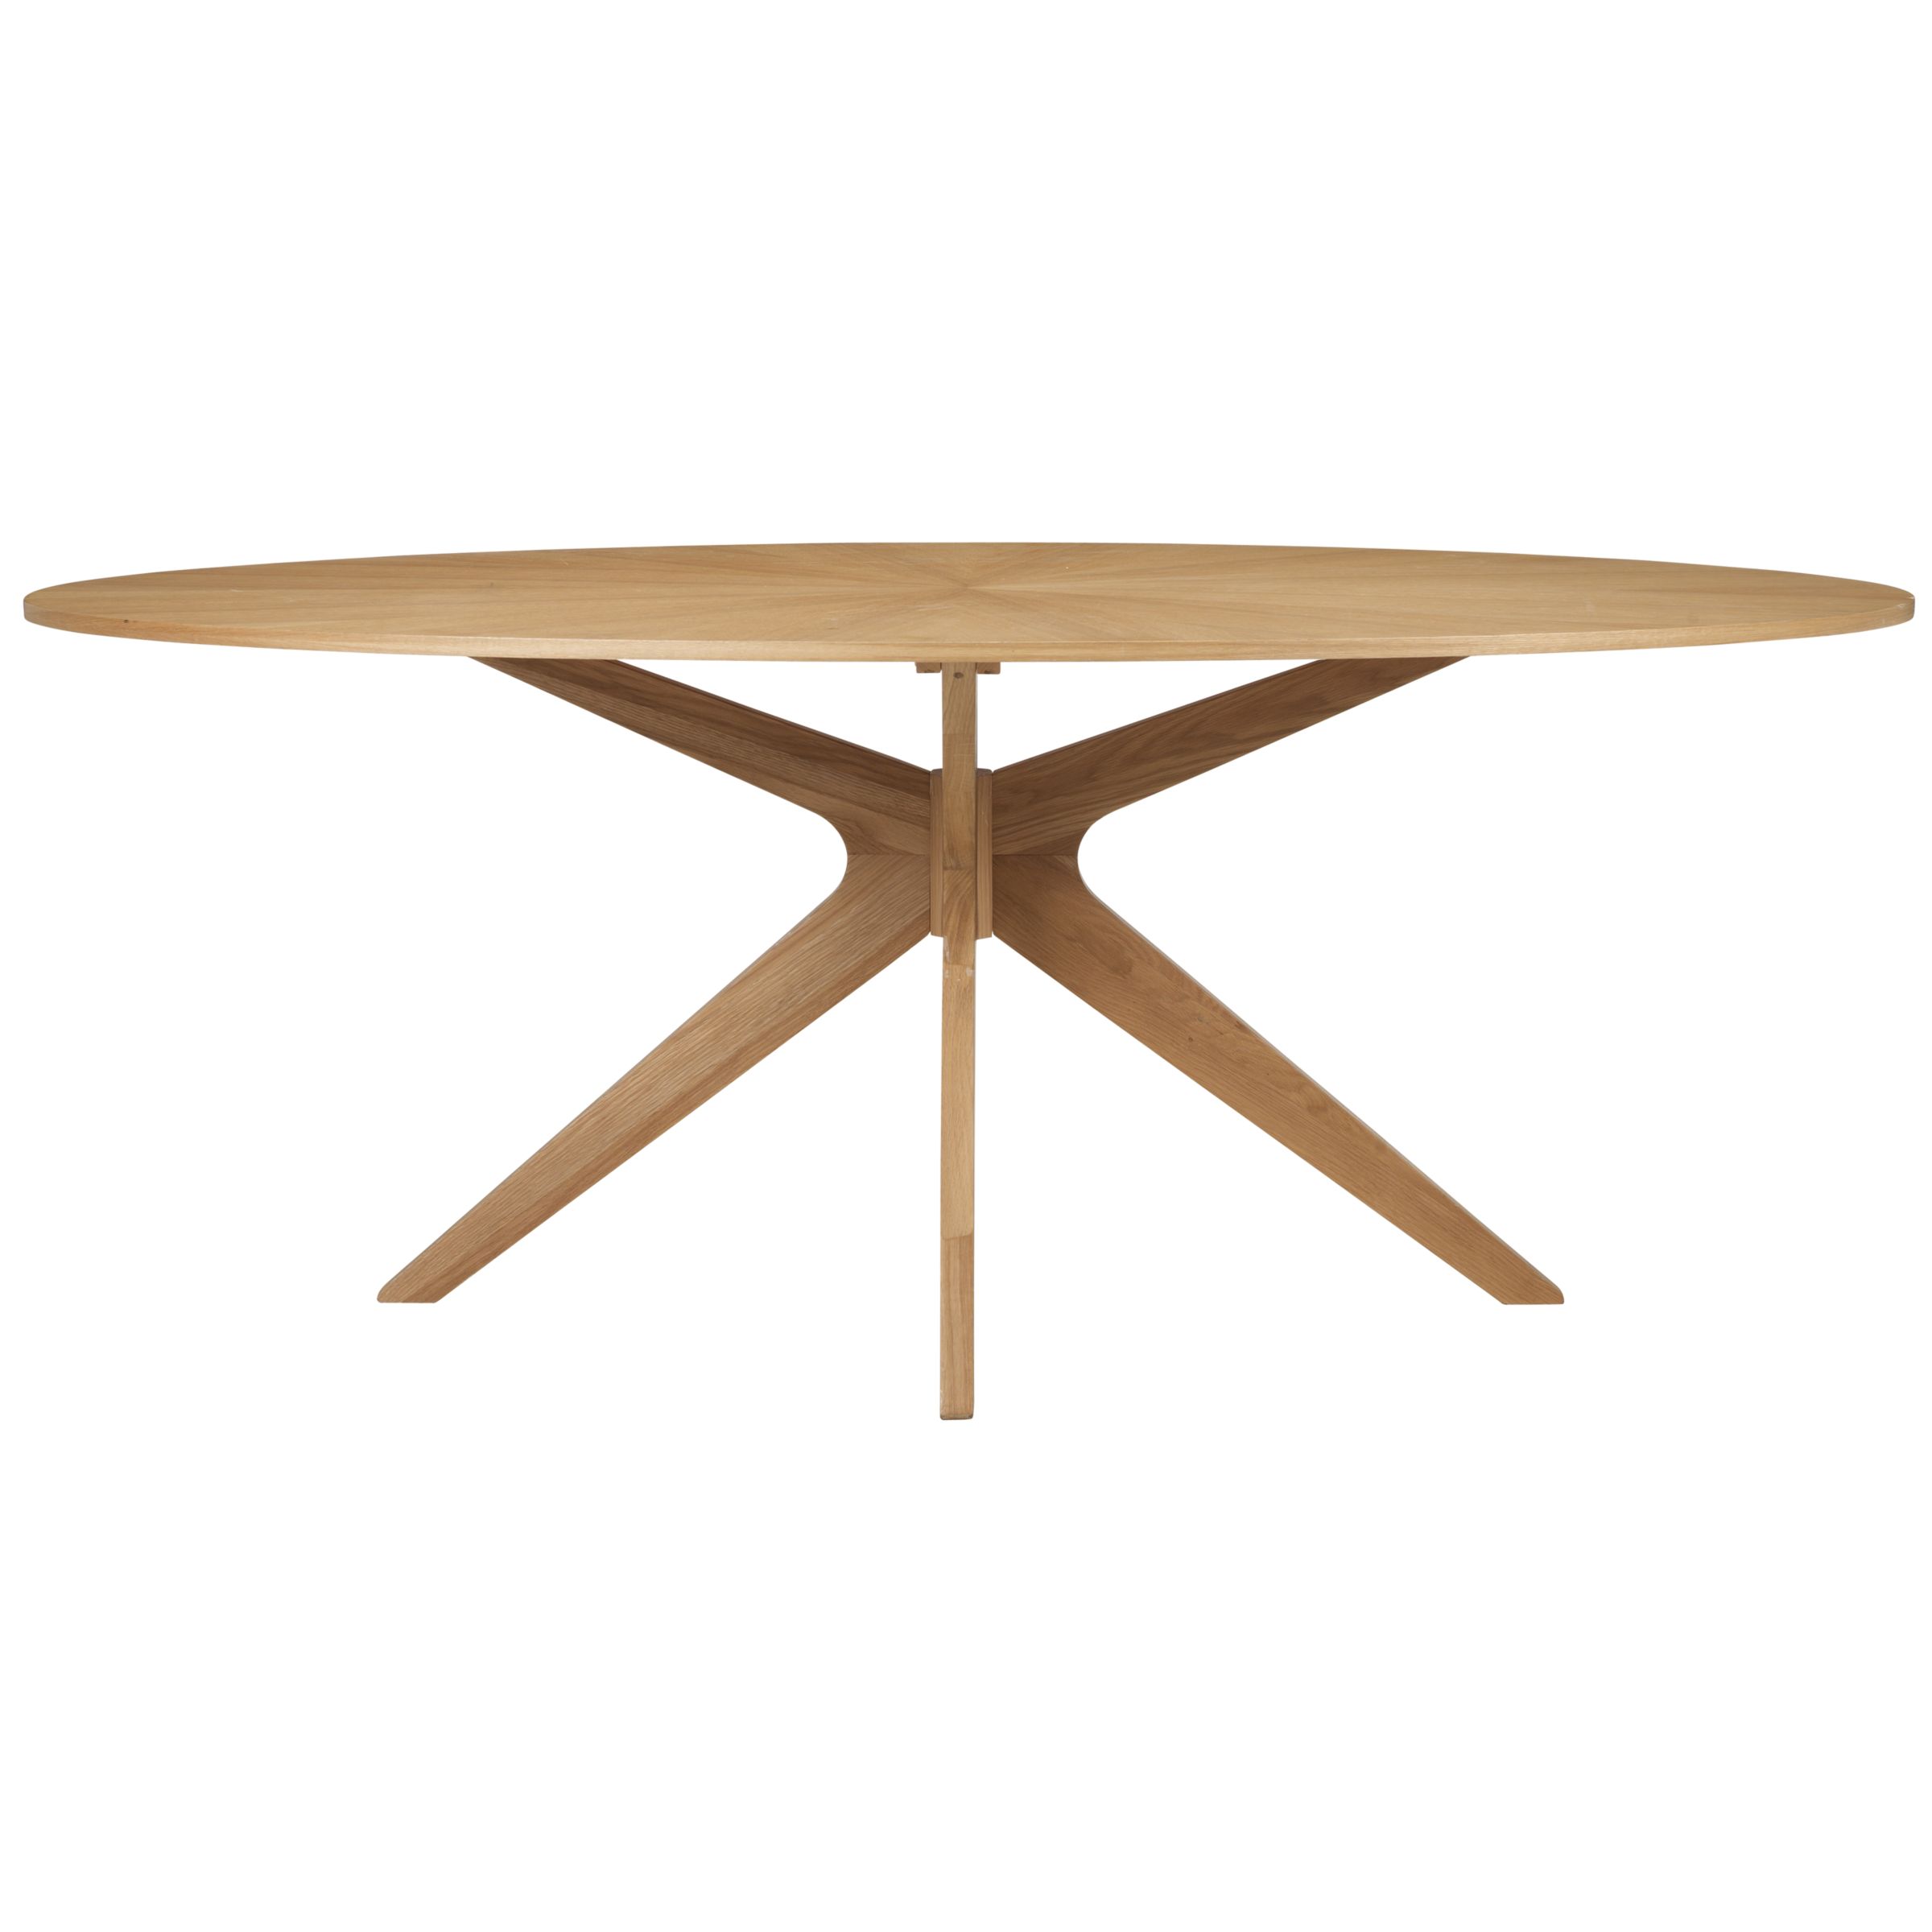 John Lewis Rigby Dining Table